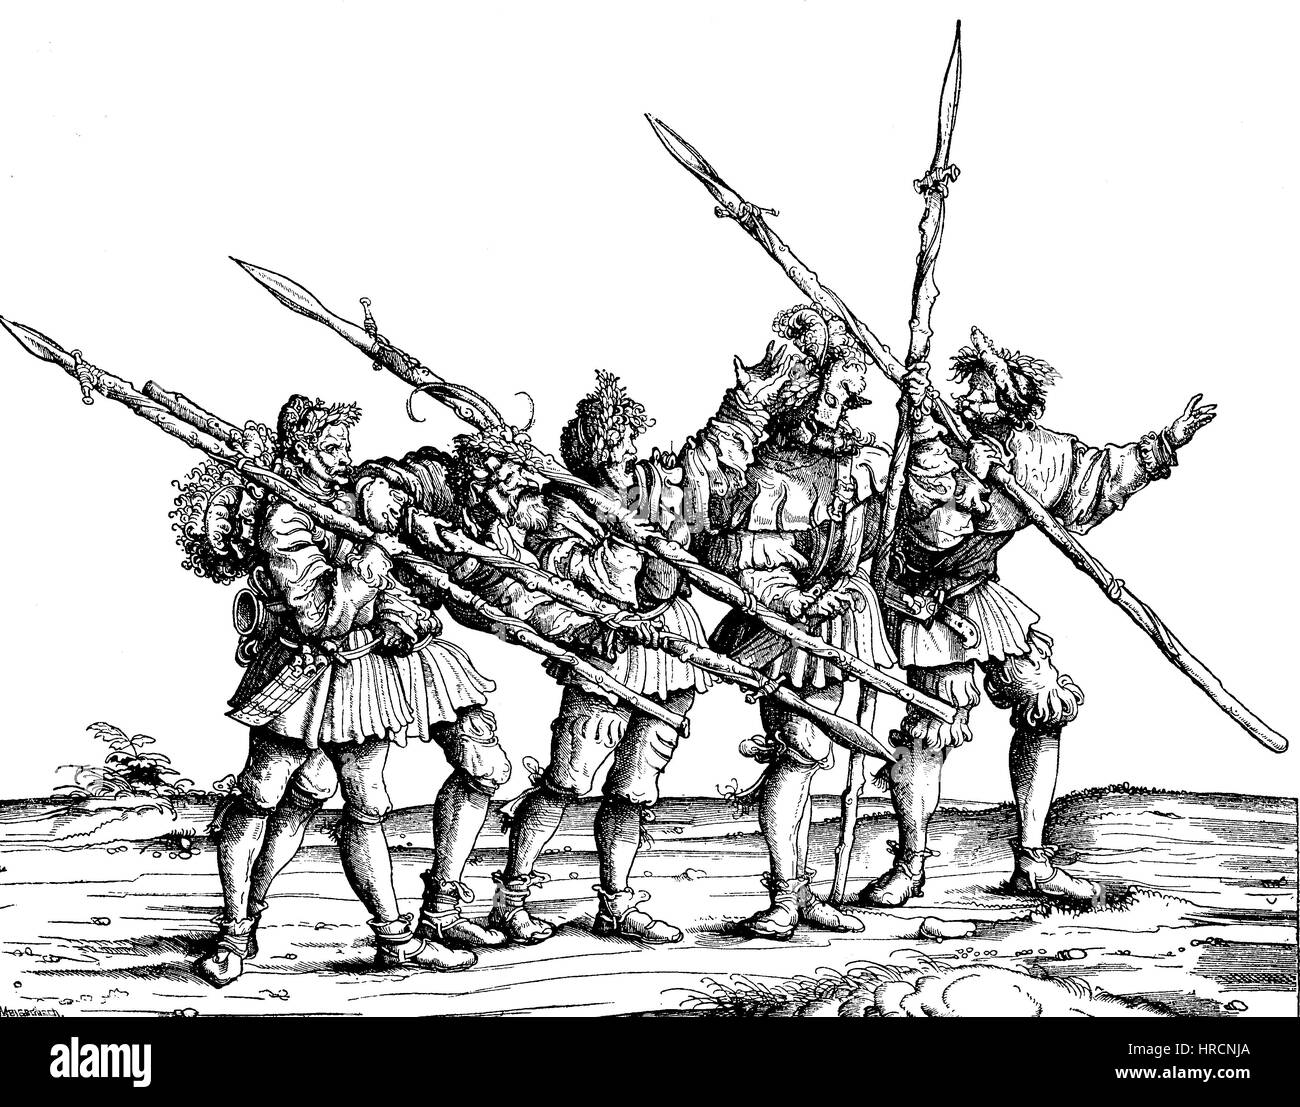 Bear hunters, Group of Maximilians I. Hunting, facsimile from Hans Burgkmair Woodcut: The Triumphal Procession, Triumphzug, or Triumphs of Maximilian is a monumental 16th-century , reproduction of an woodcut from the 19th century, 1885 Stock Photo